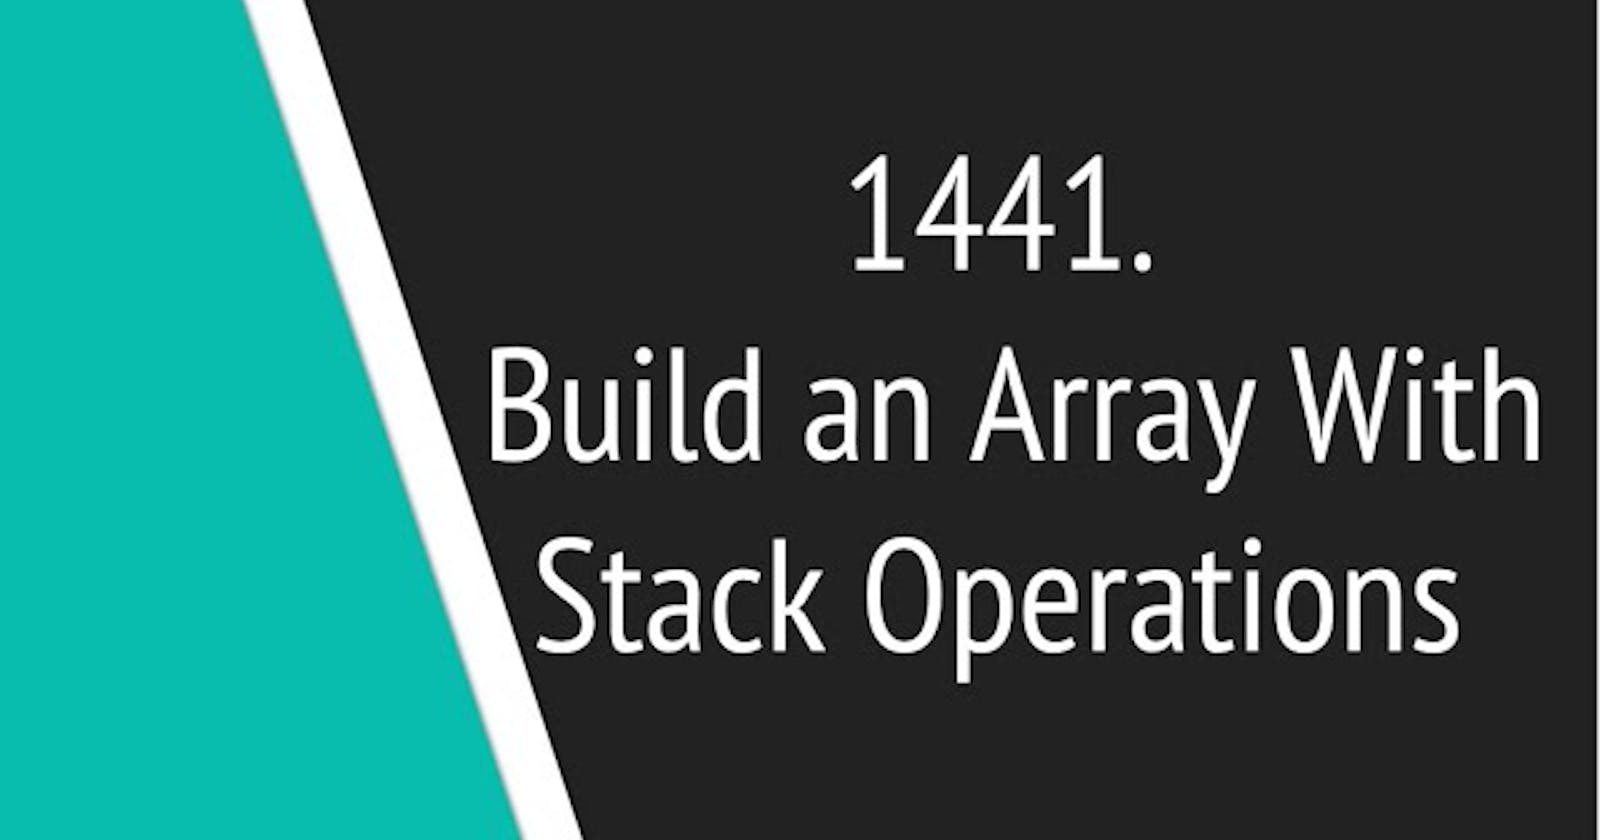 Build an Array with Stack Operations